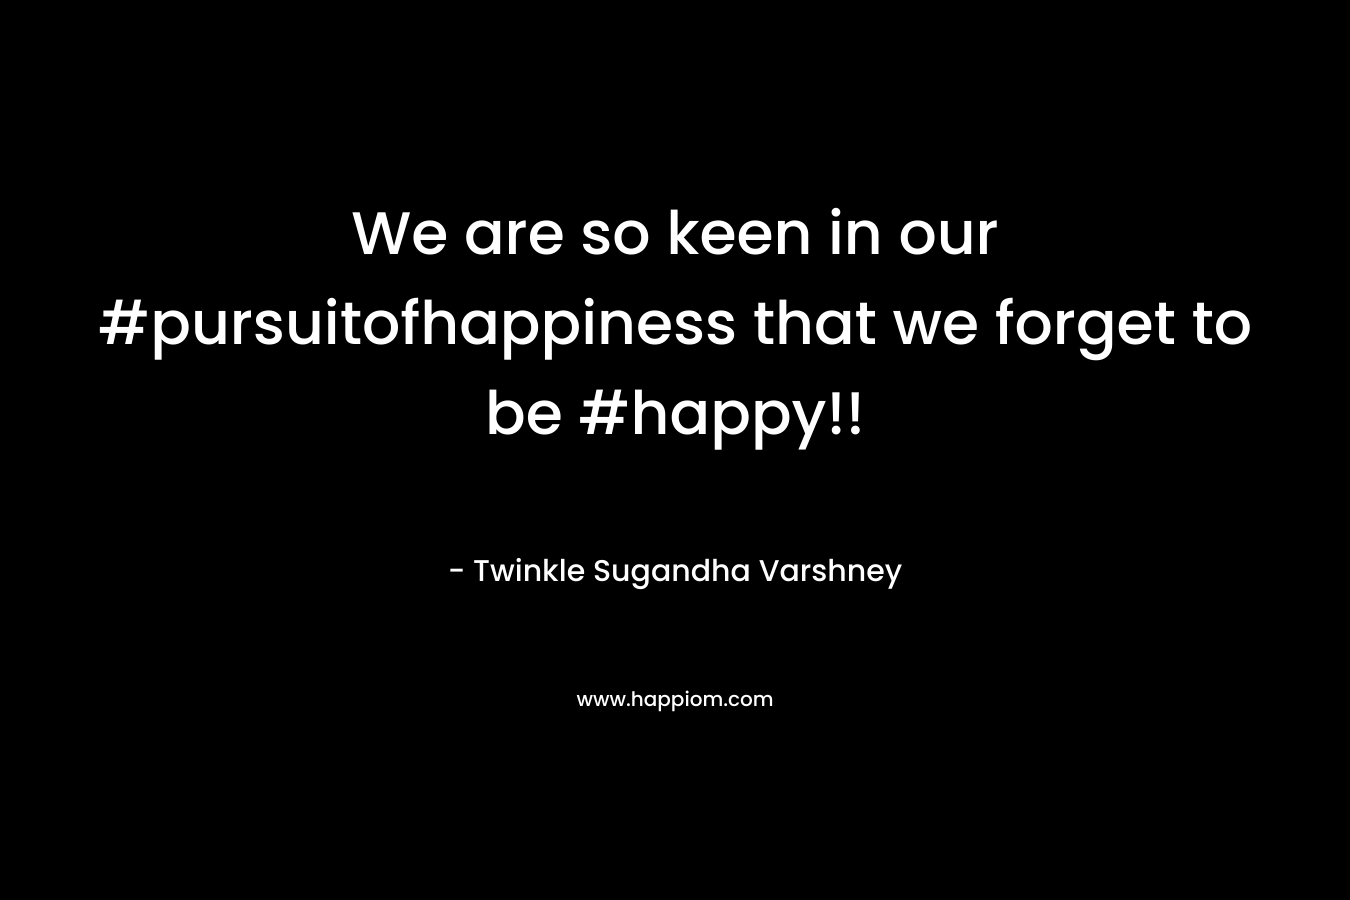 We are so keen in our #pursuitofhappiness that we forget to be #happy!! – Twinkle Sugandha Varshney